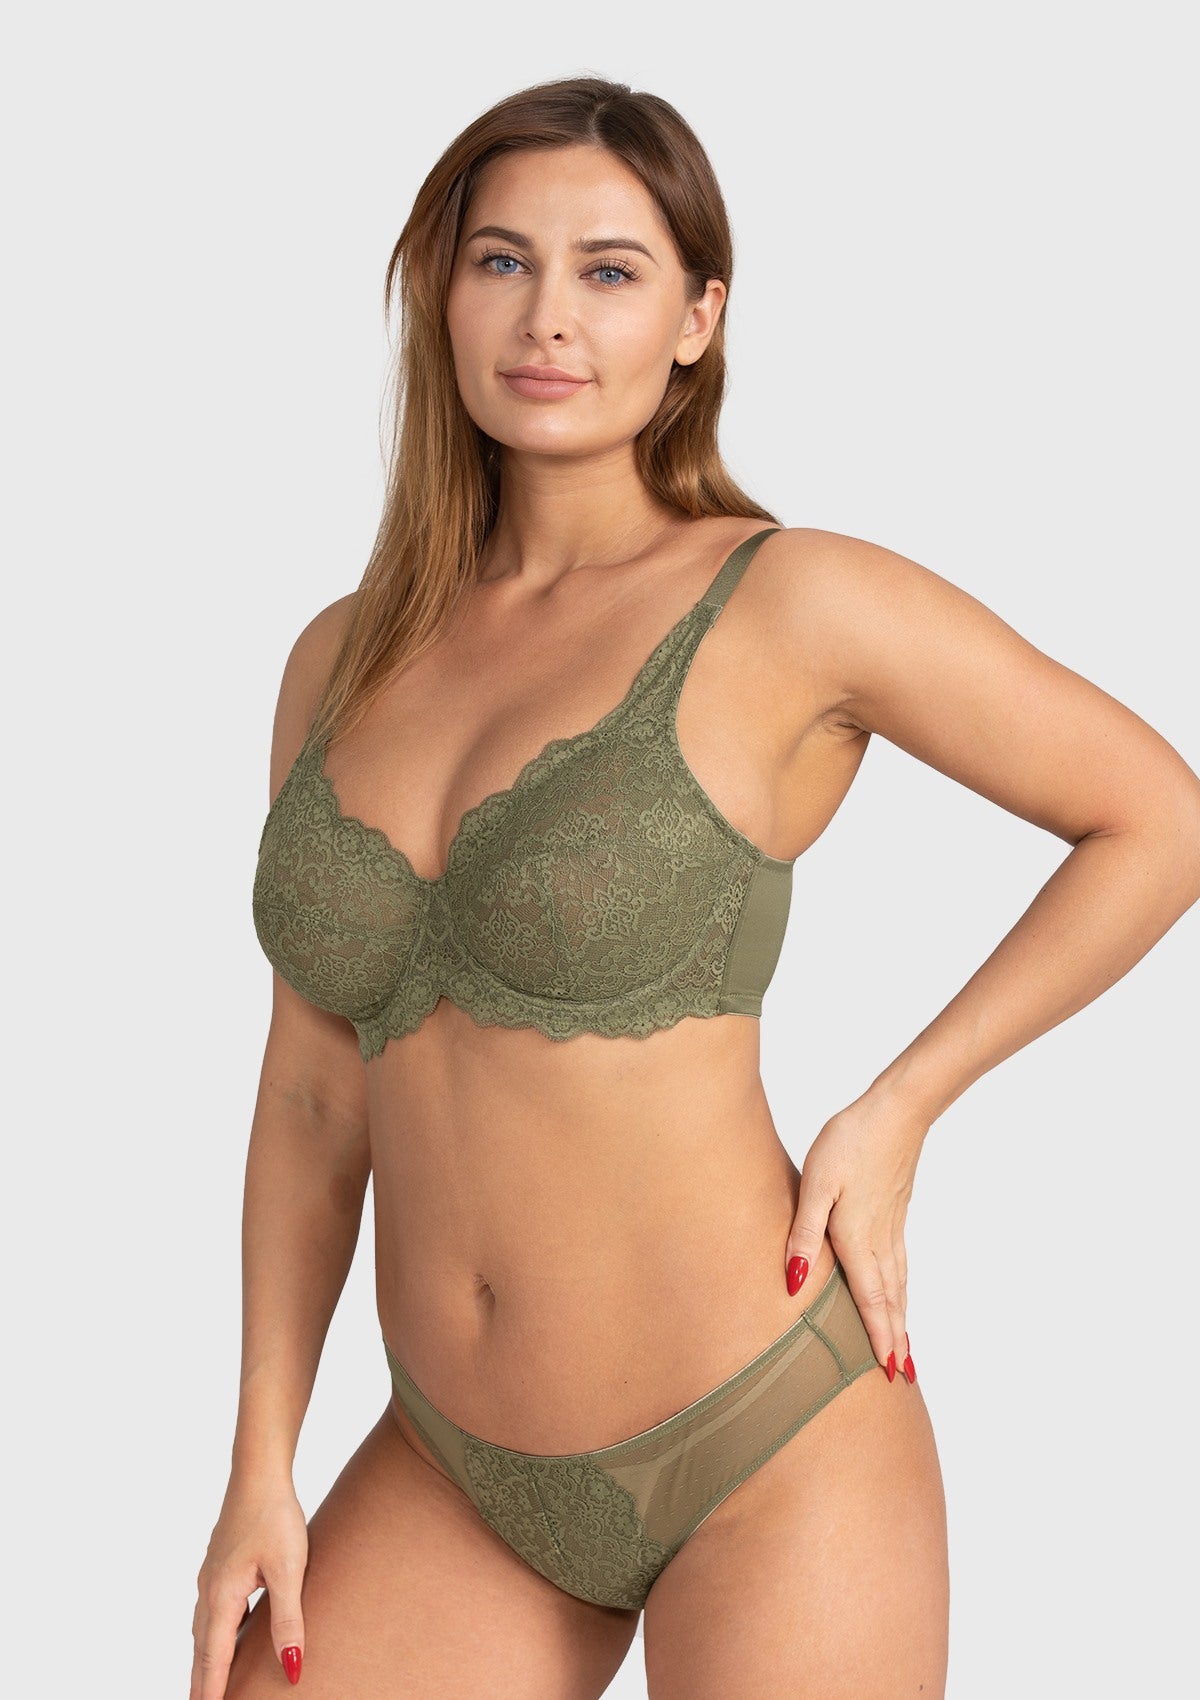 HSIA All-Over Floral Lace Unlined Bra: Minimizer Bra For Heavy Breasts - Dark Green / 34 / C